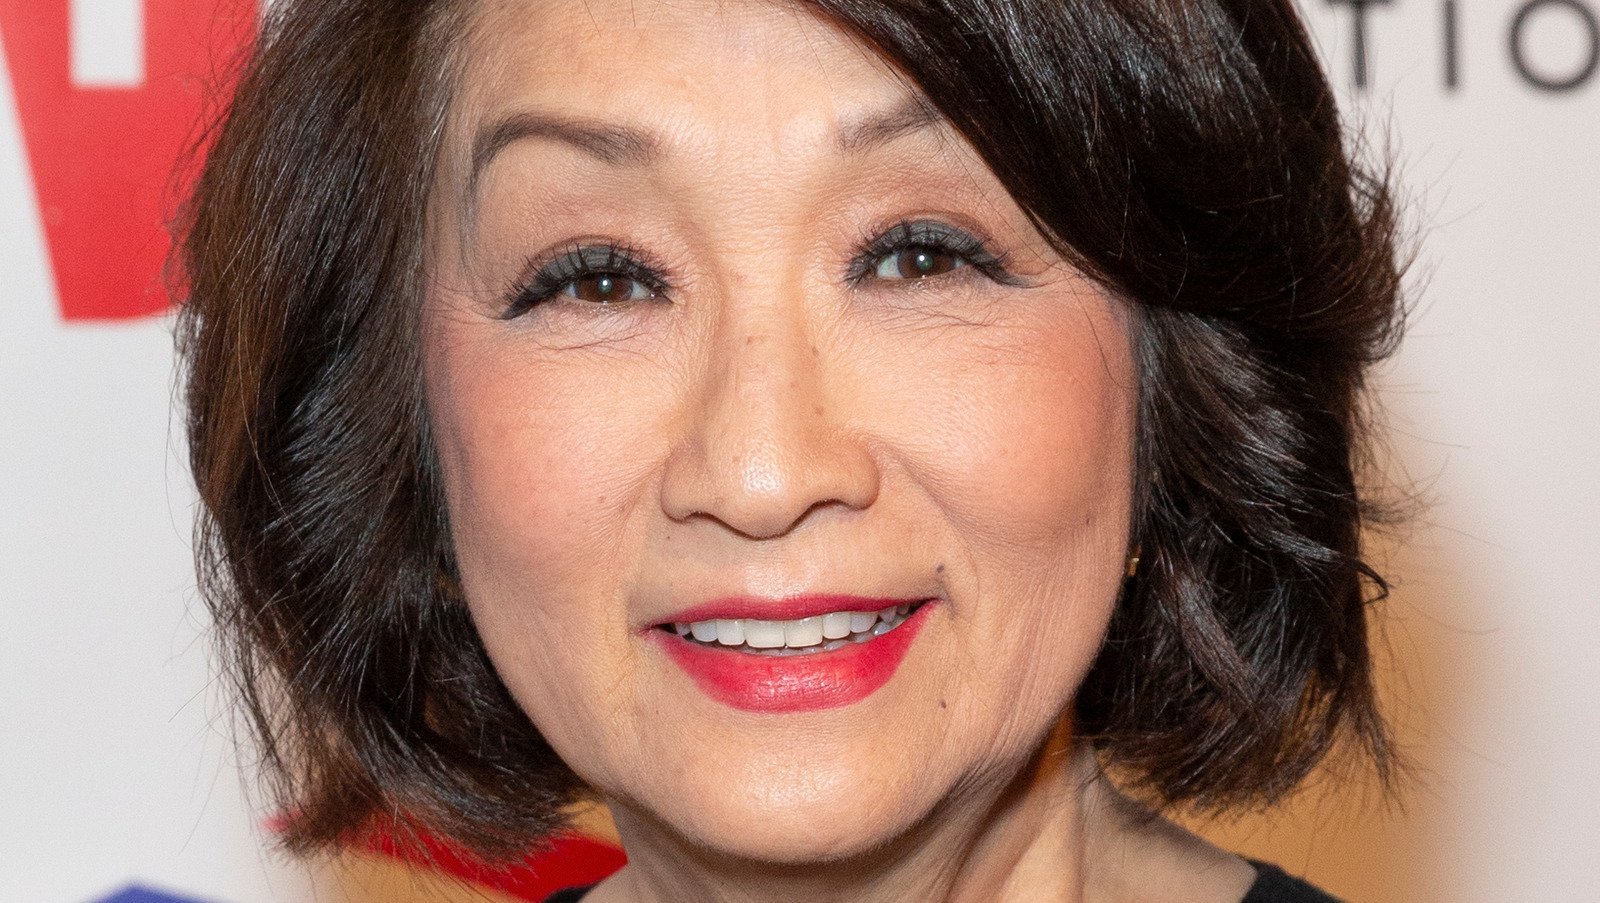 How Connie Chung Really Felt About Working With Dan Rather